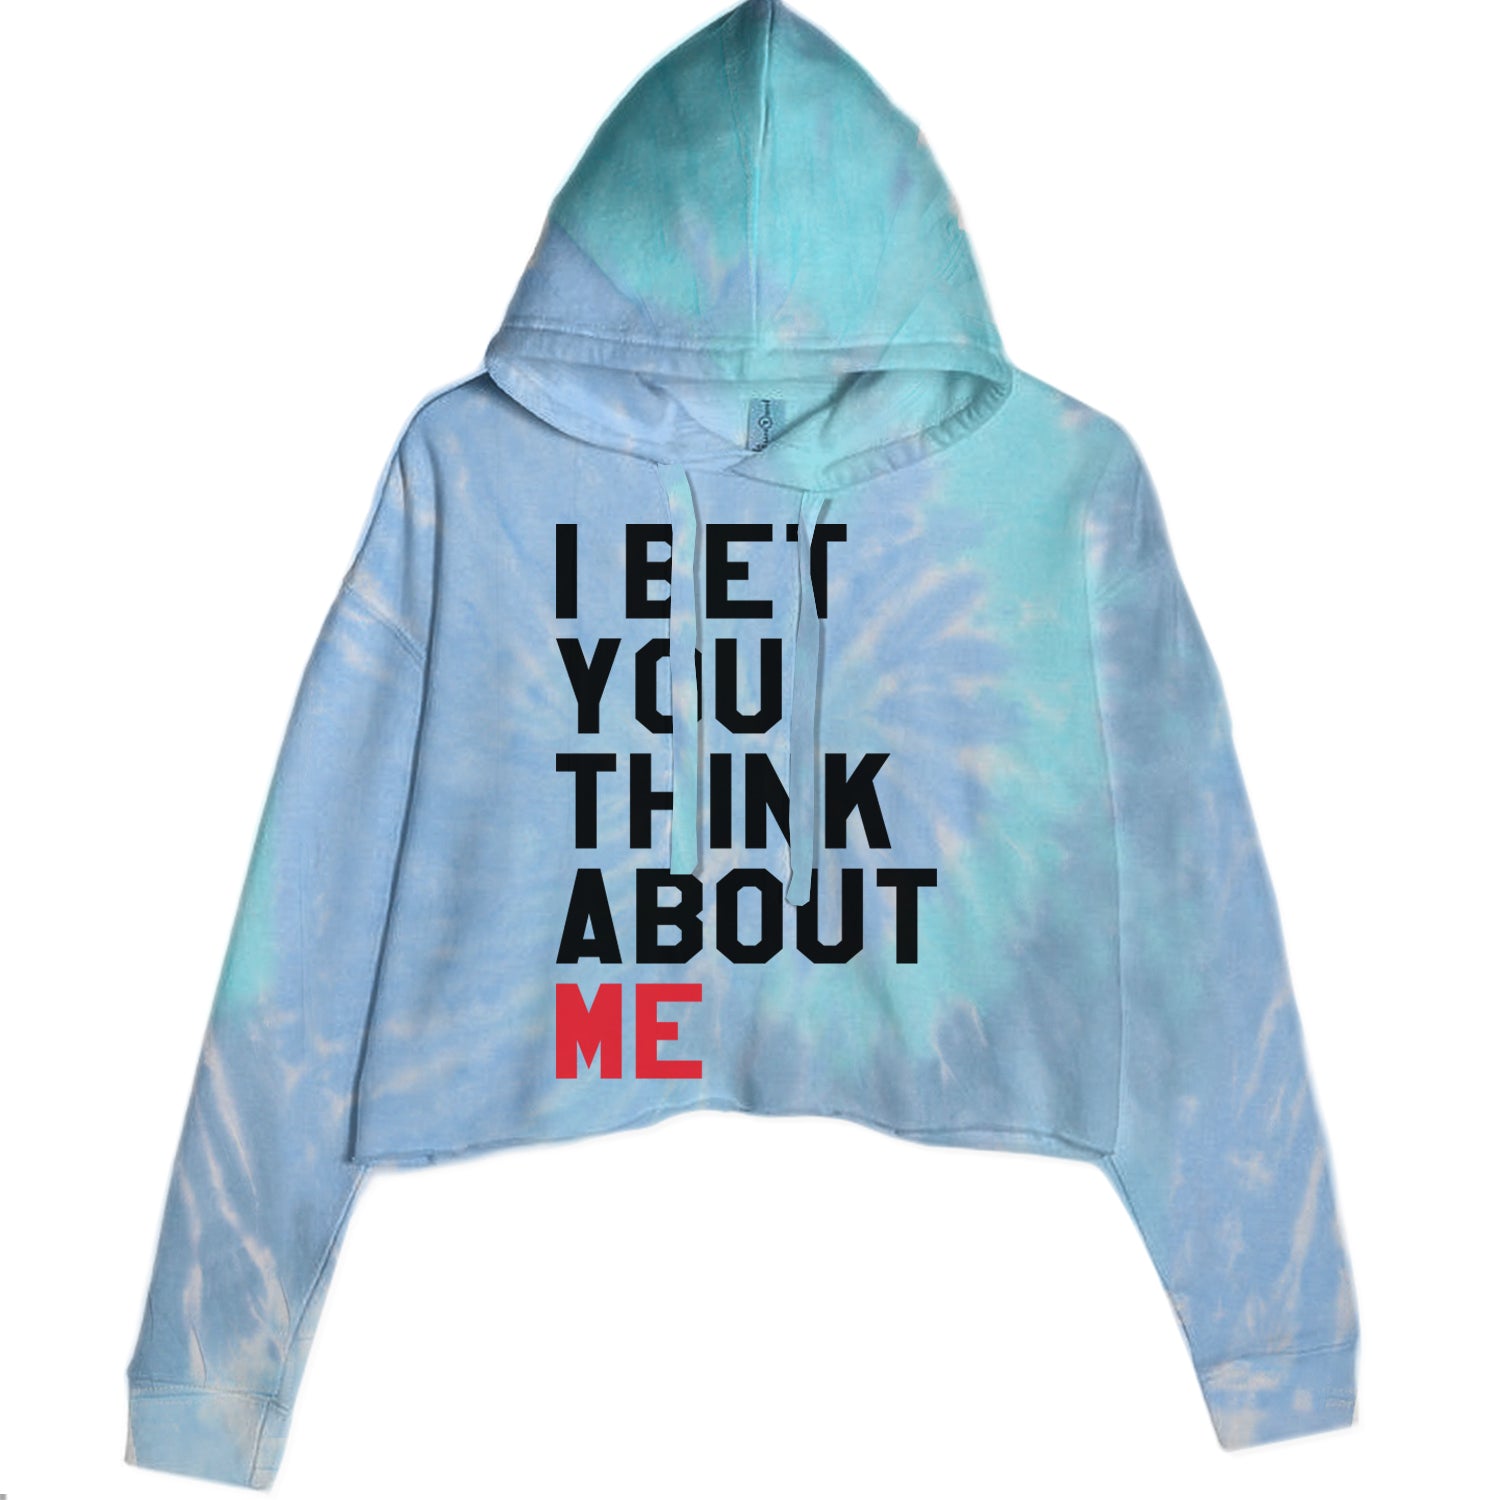 I Bet You Think About Me New TTPD Era Cropped Hoodie Sweatshirt